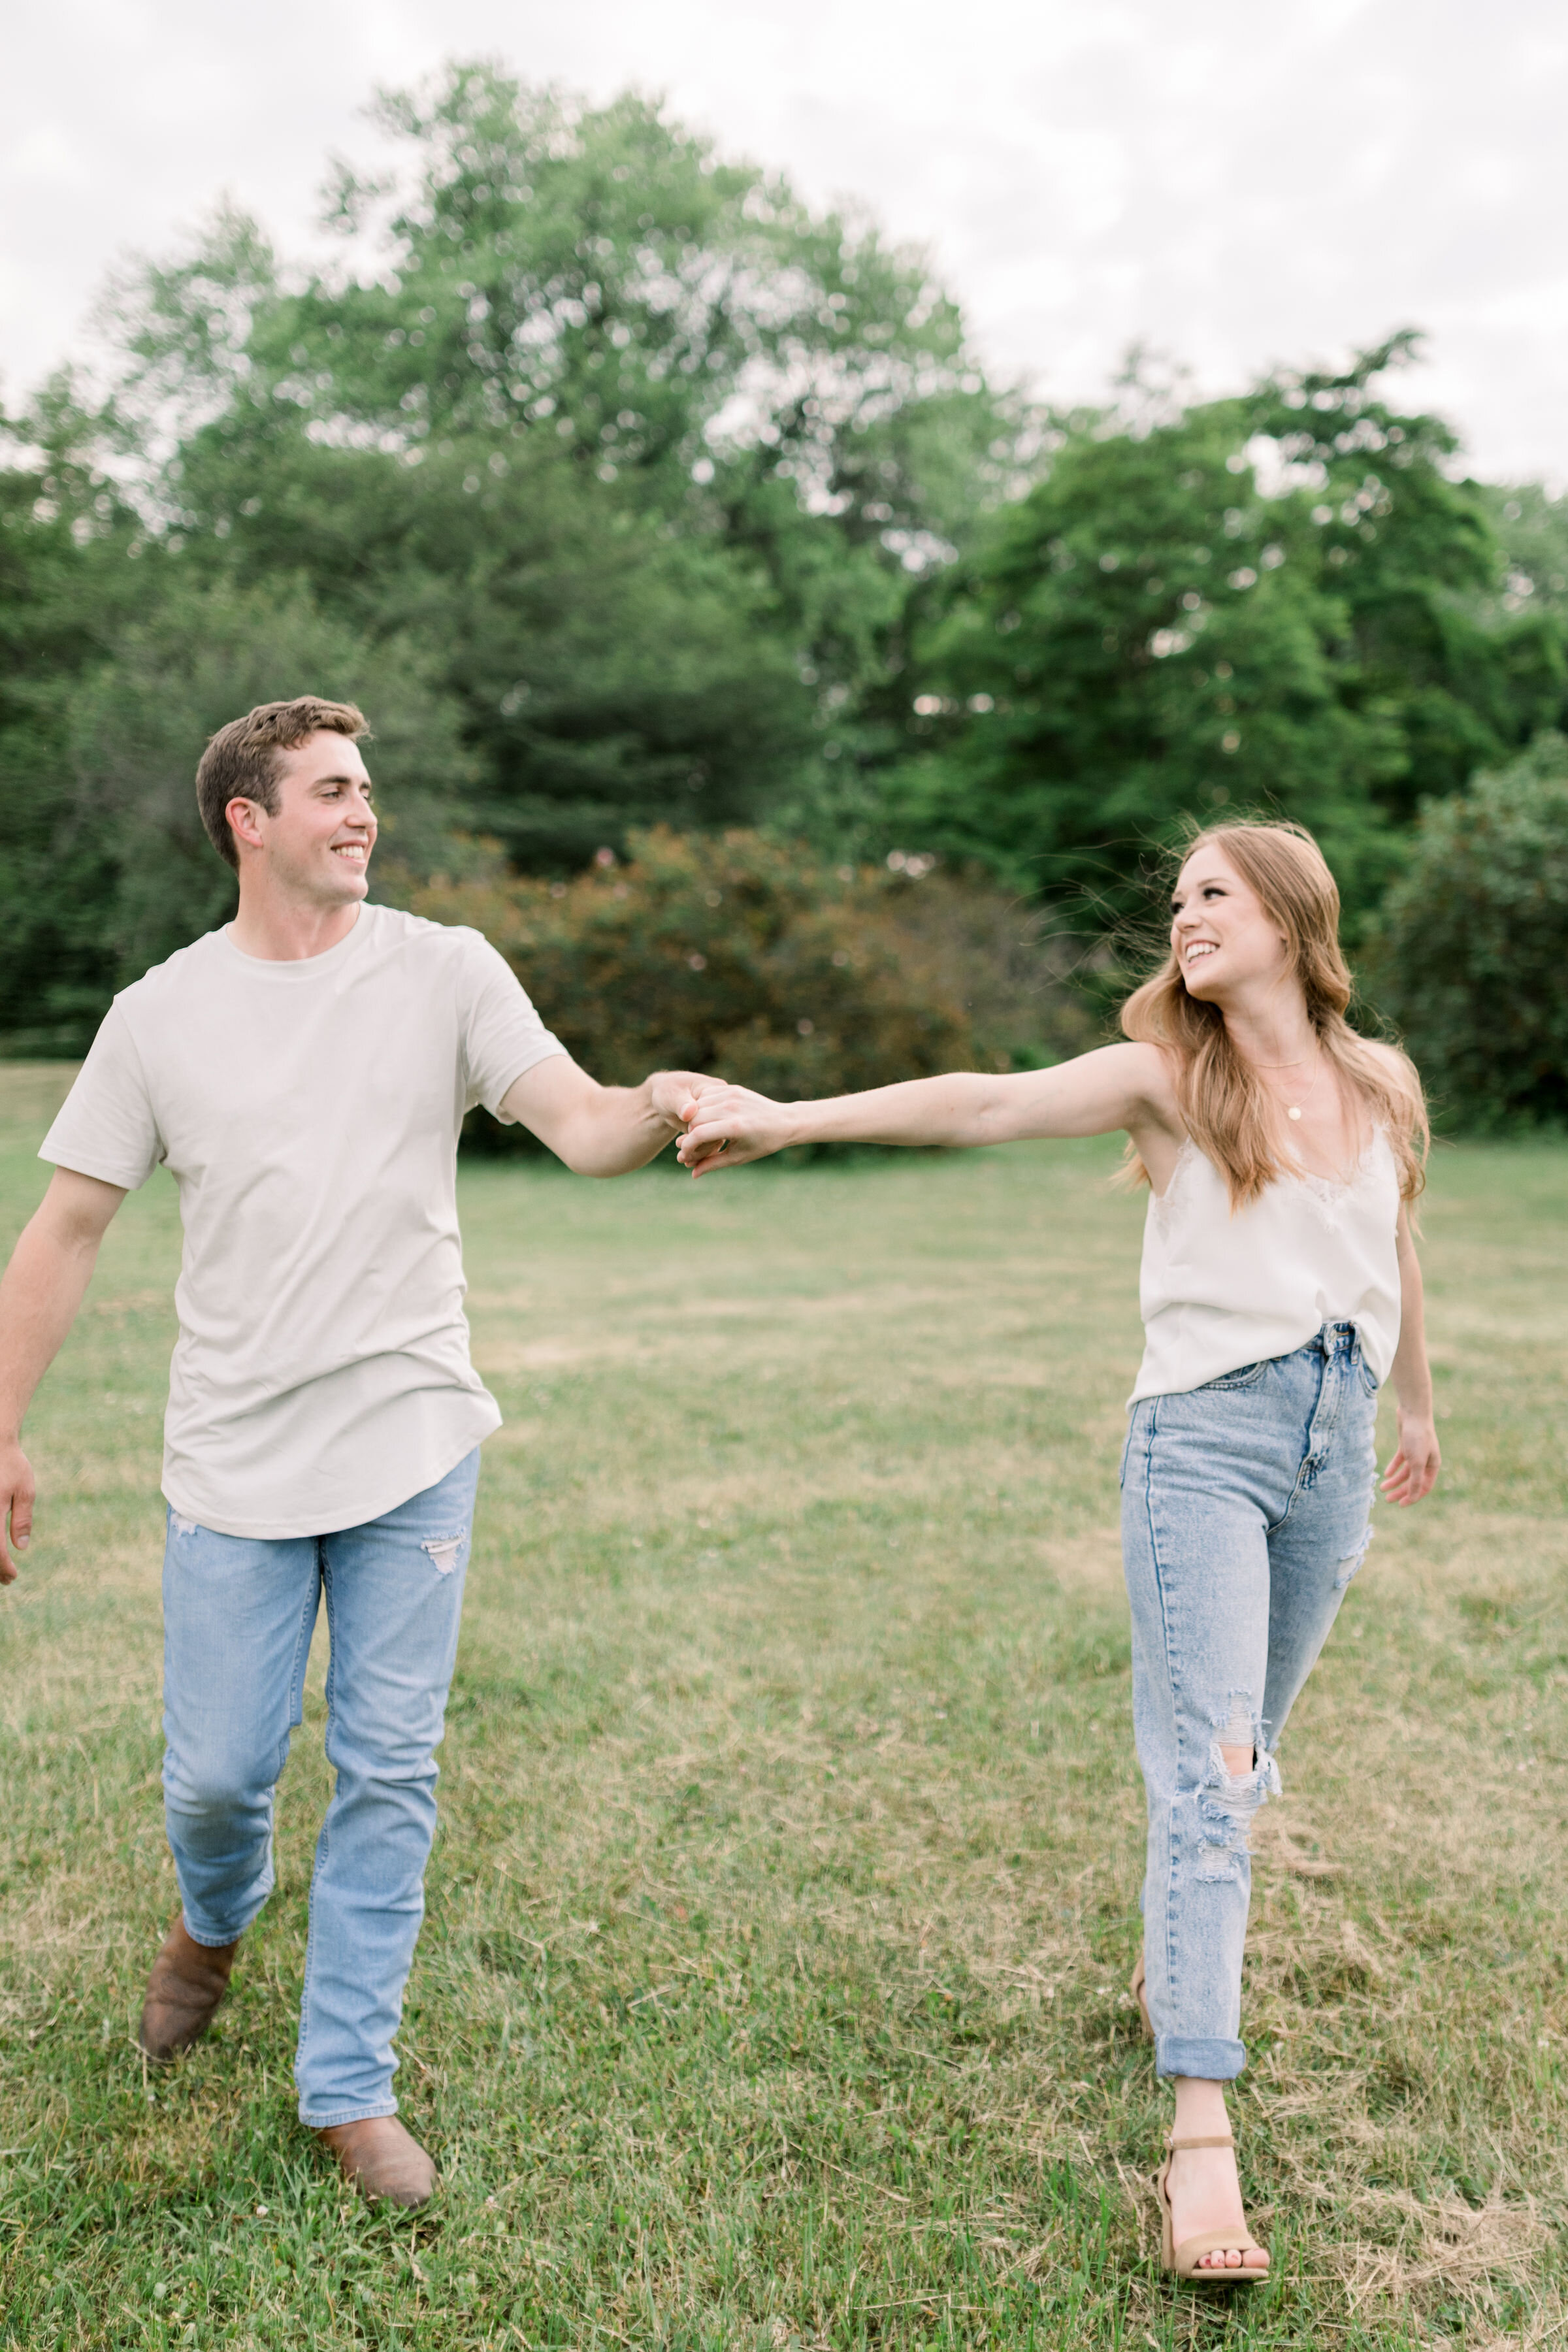  Ottawa, Ontario photographer, Chelsea Mason Photography captures this casually dressed couple walking through a grassy field holding hands. couple holding hands Ottawa couples photographer engagement poses playful #ChelseaMasonPhotography #TheArbore